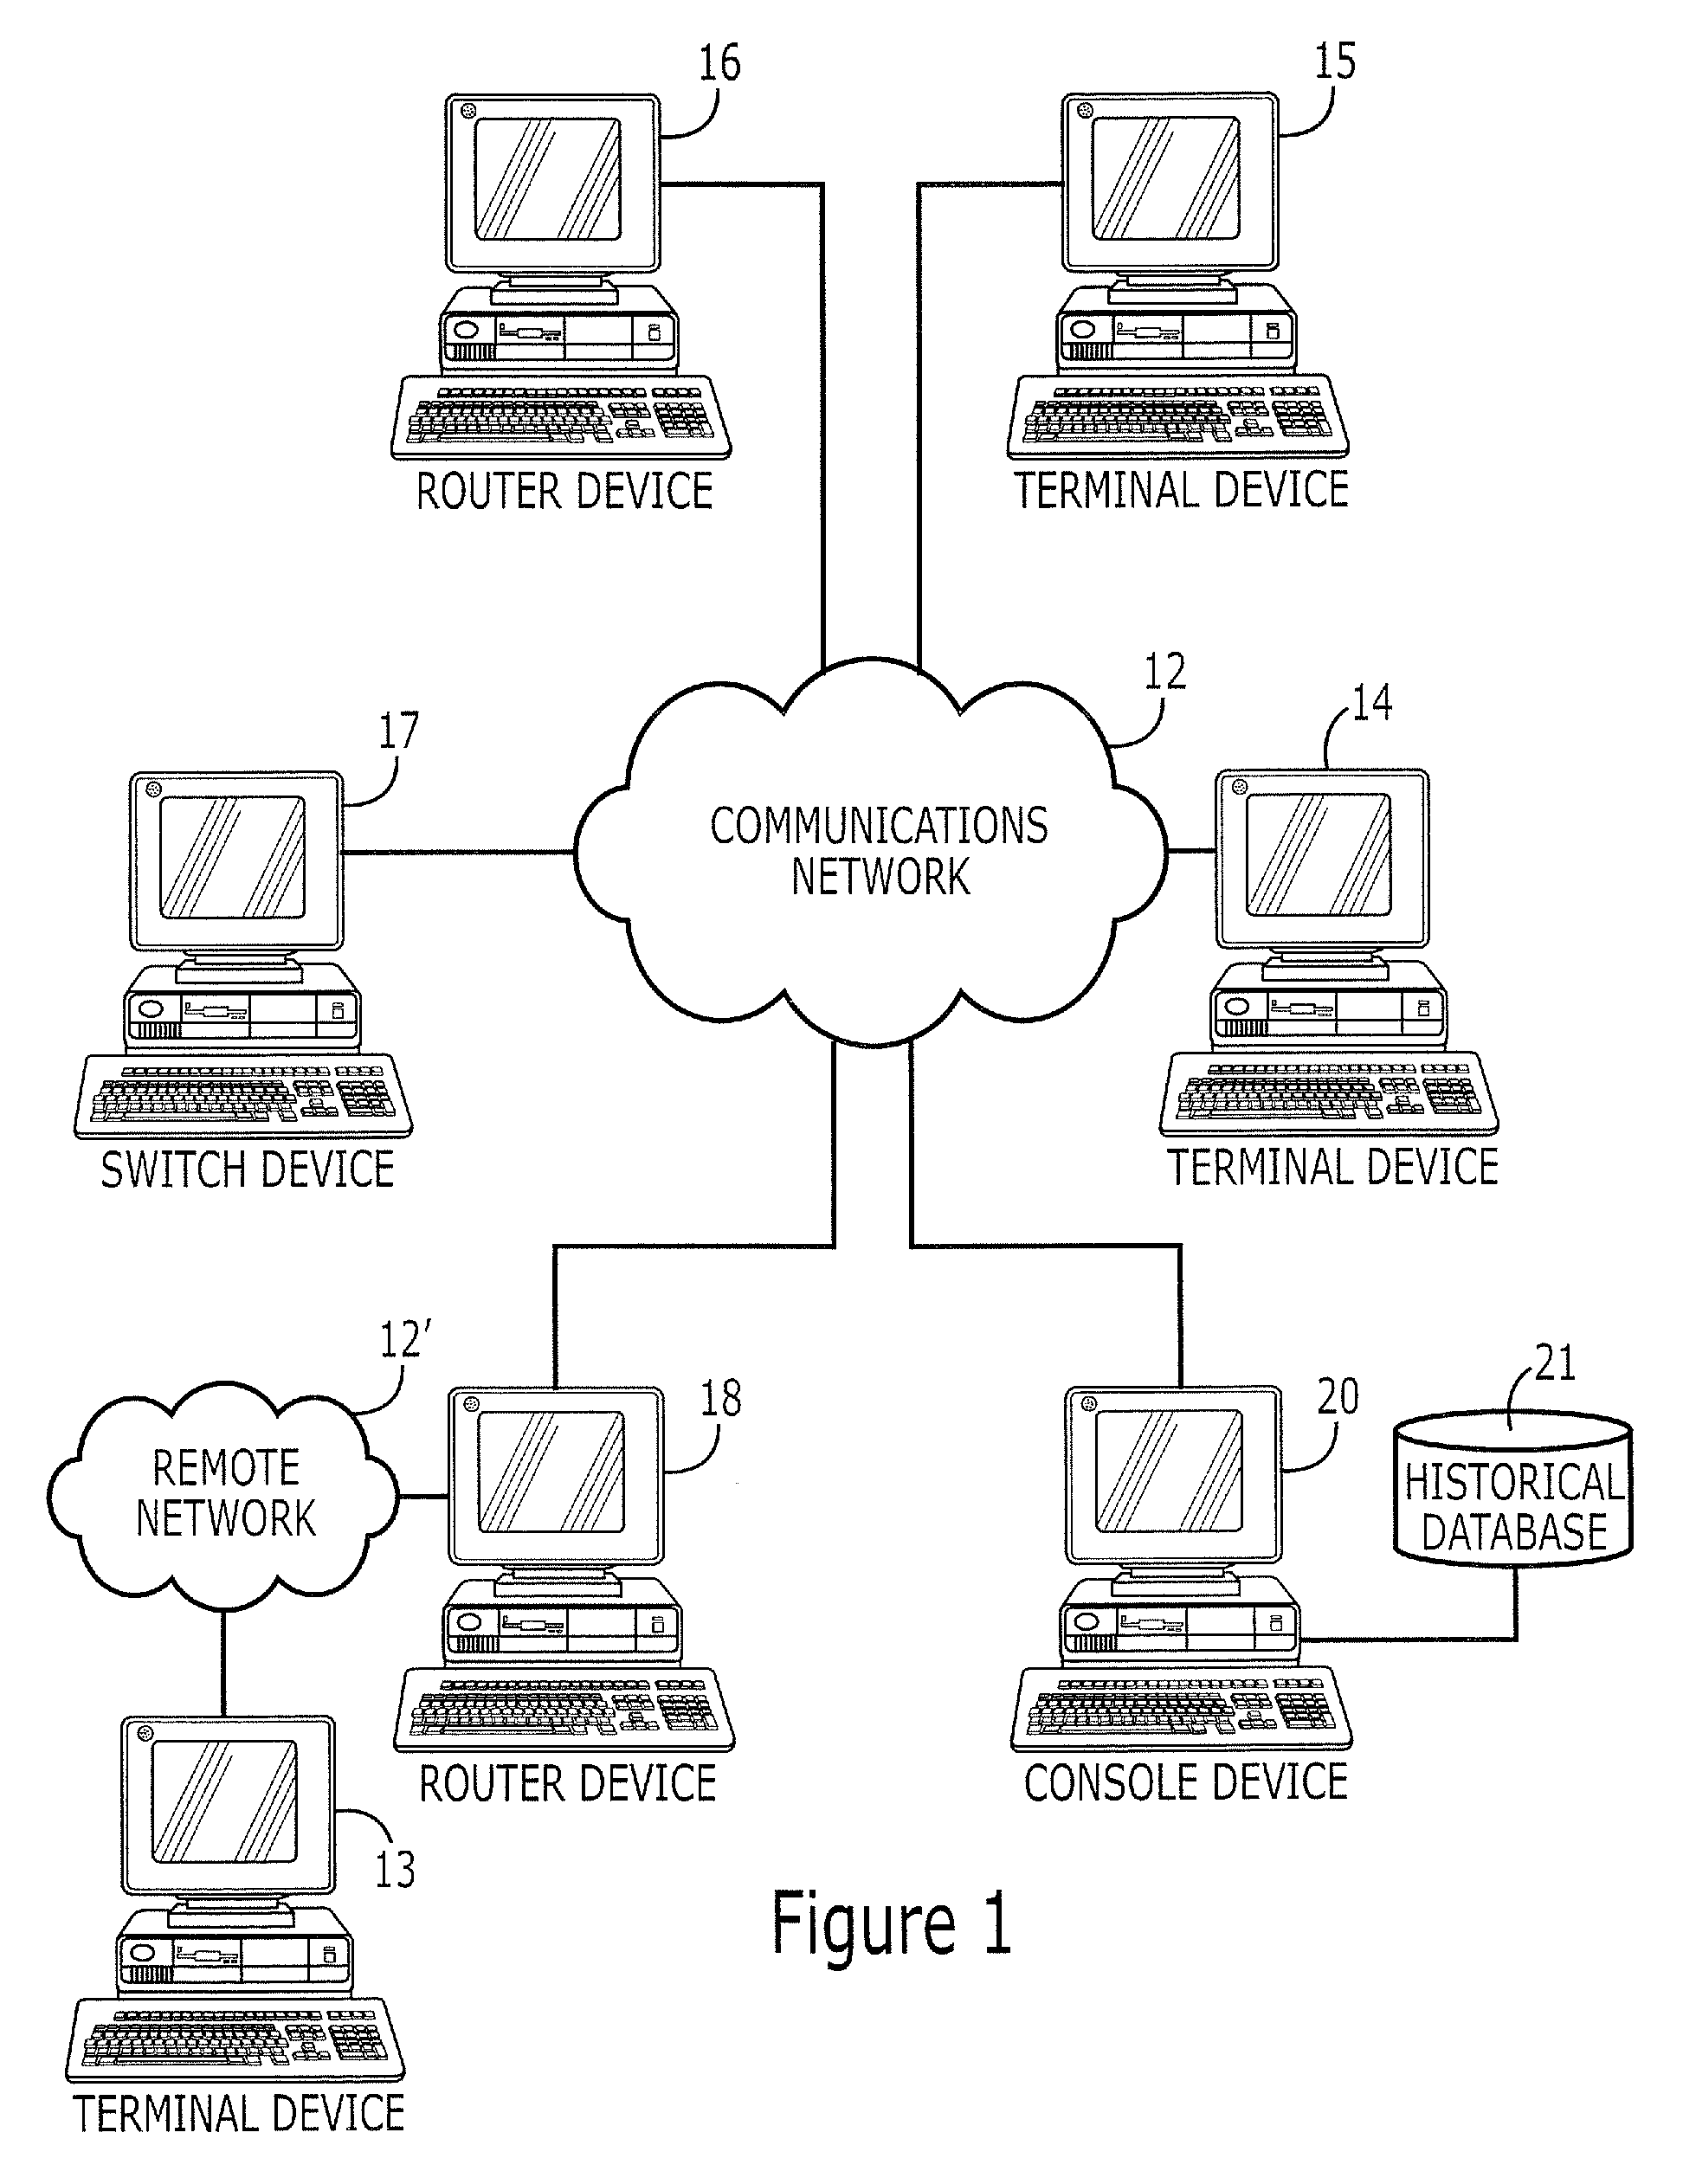 Methods, systems and computer program products for managing execution of information technology (IT) processes